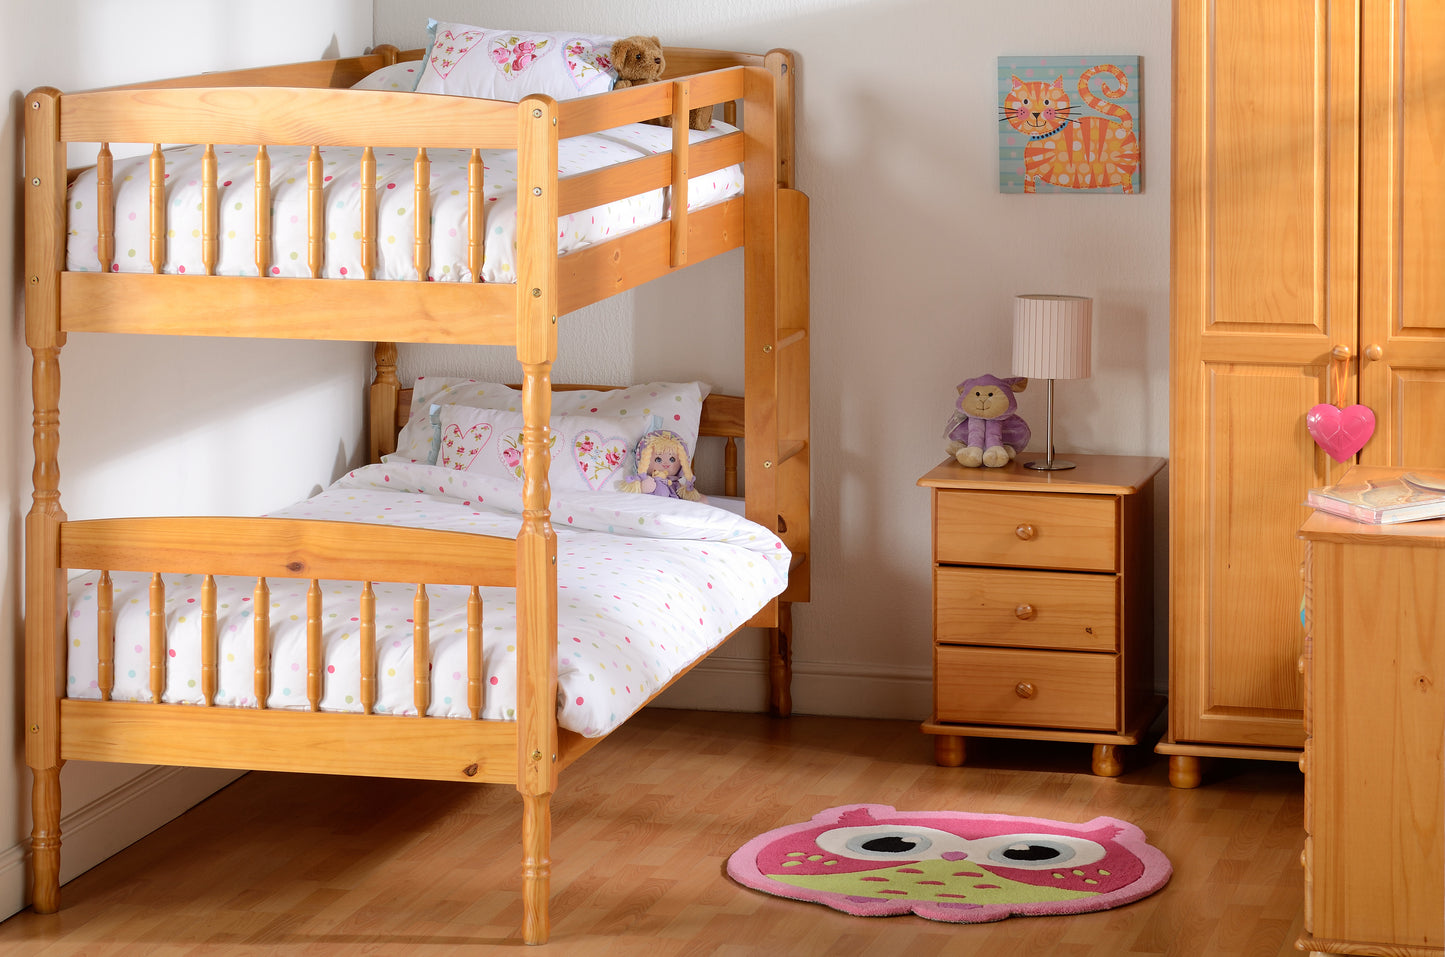 ALBANY 3' BUNK BED - ANTIQUE PINE